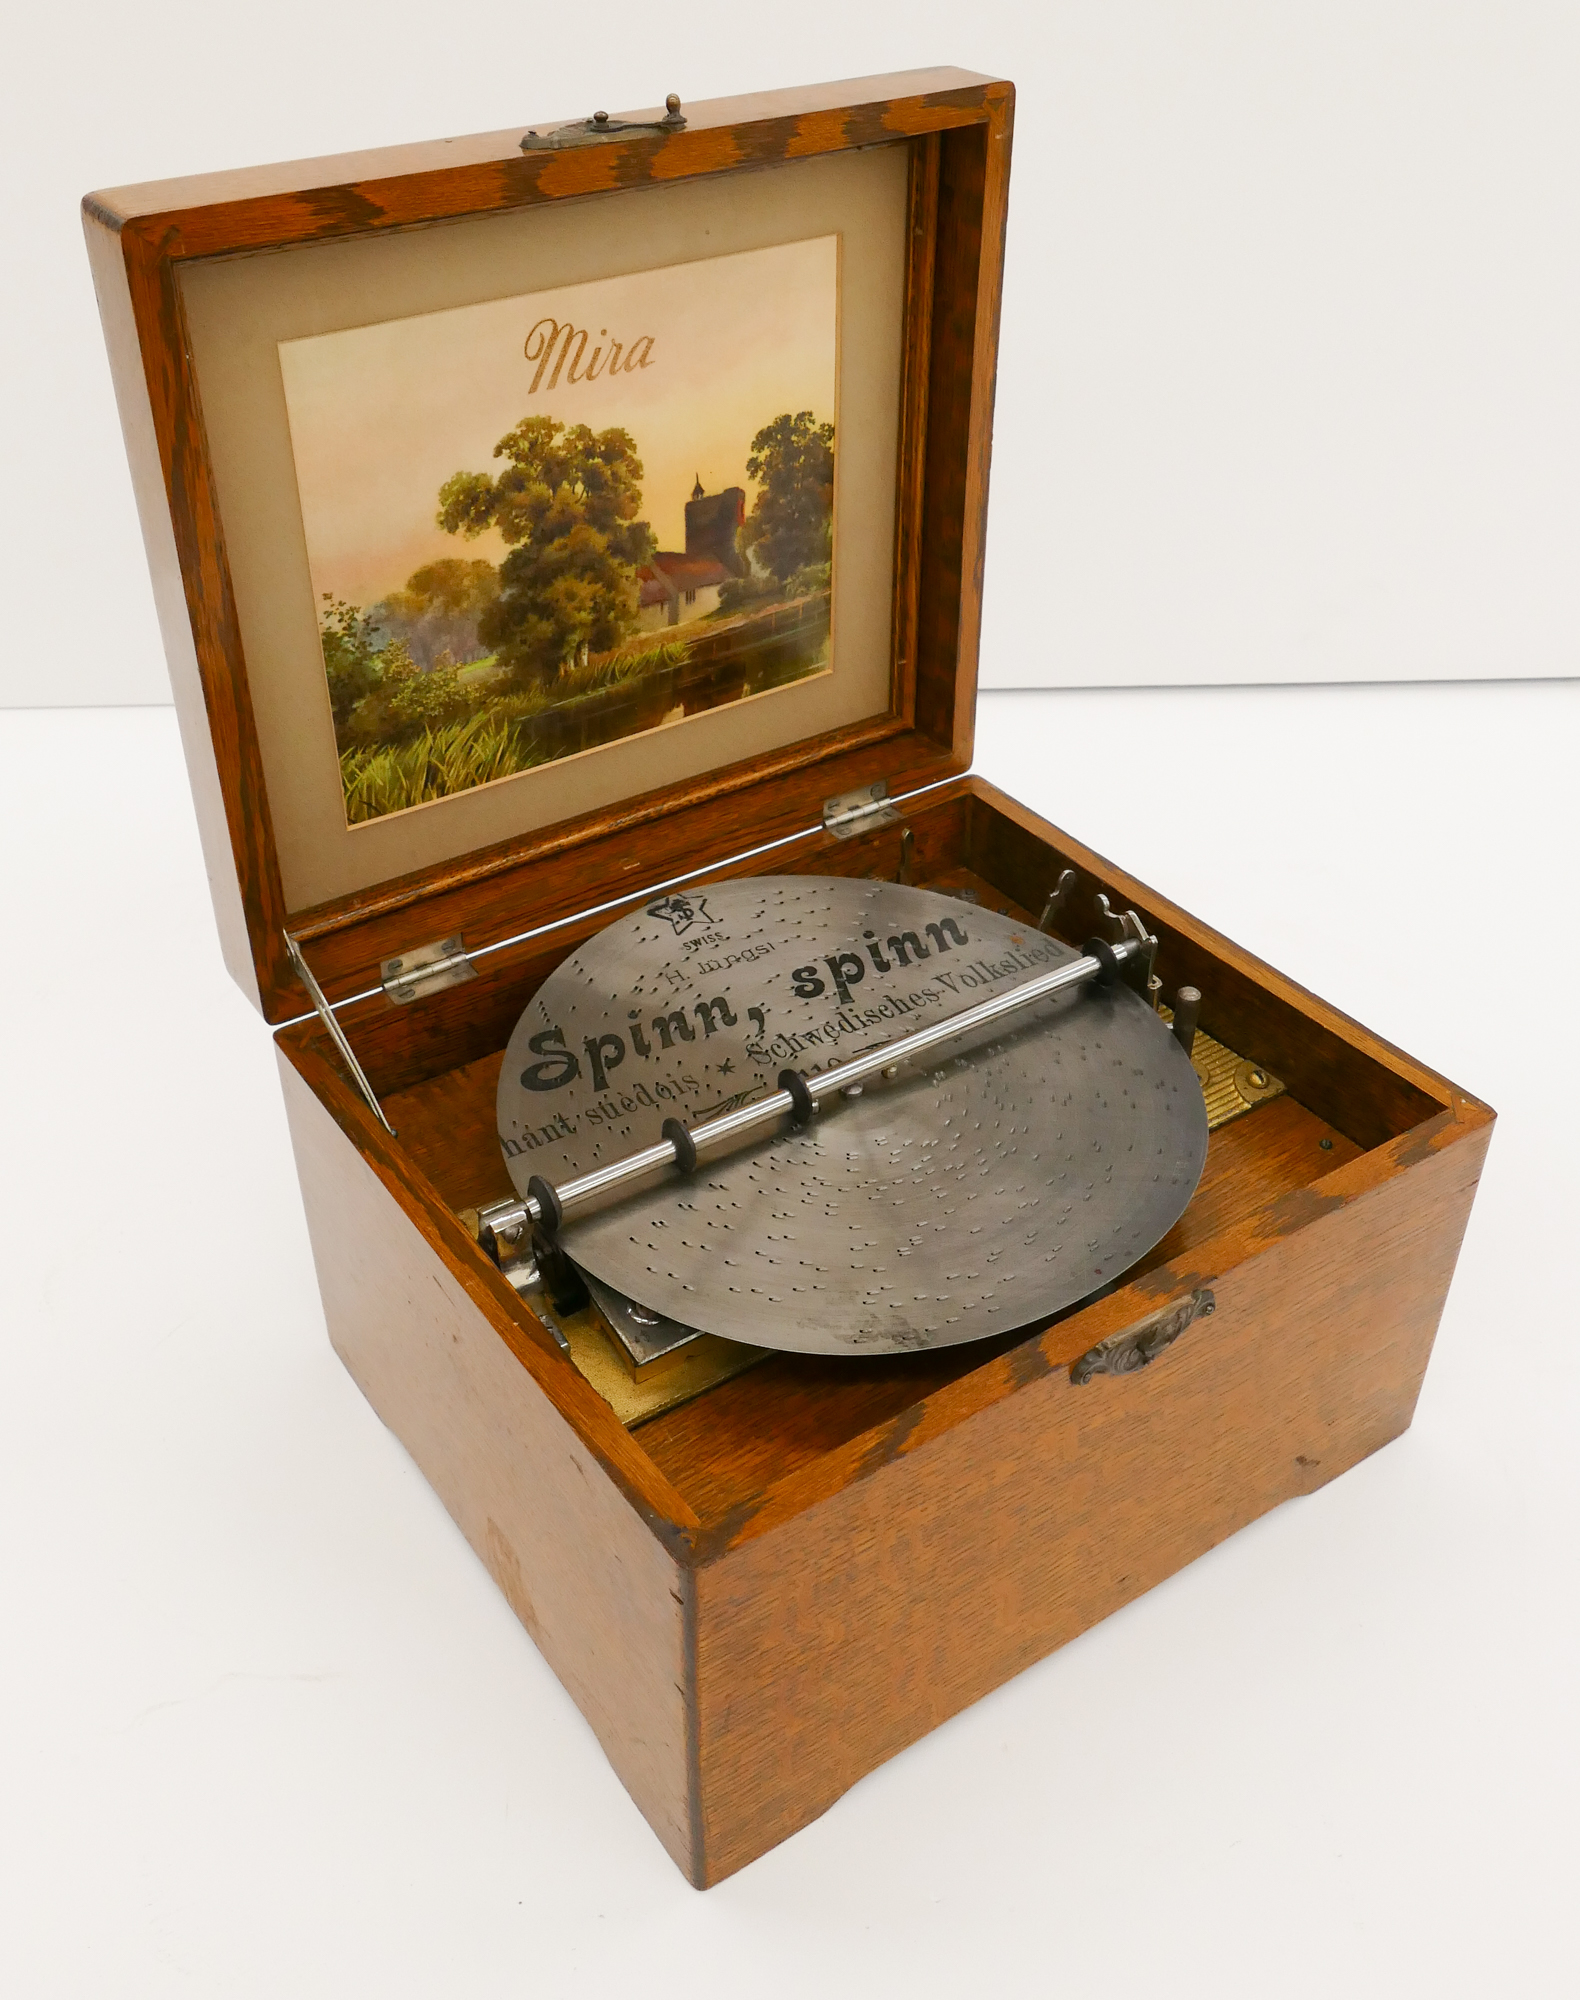 Mira Small Tabletop Disc Music